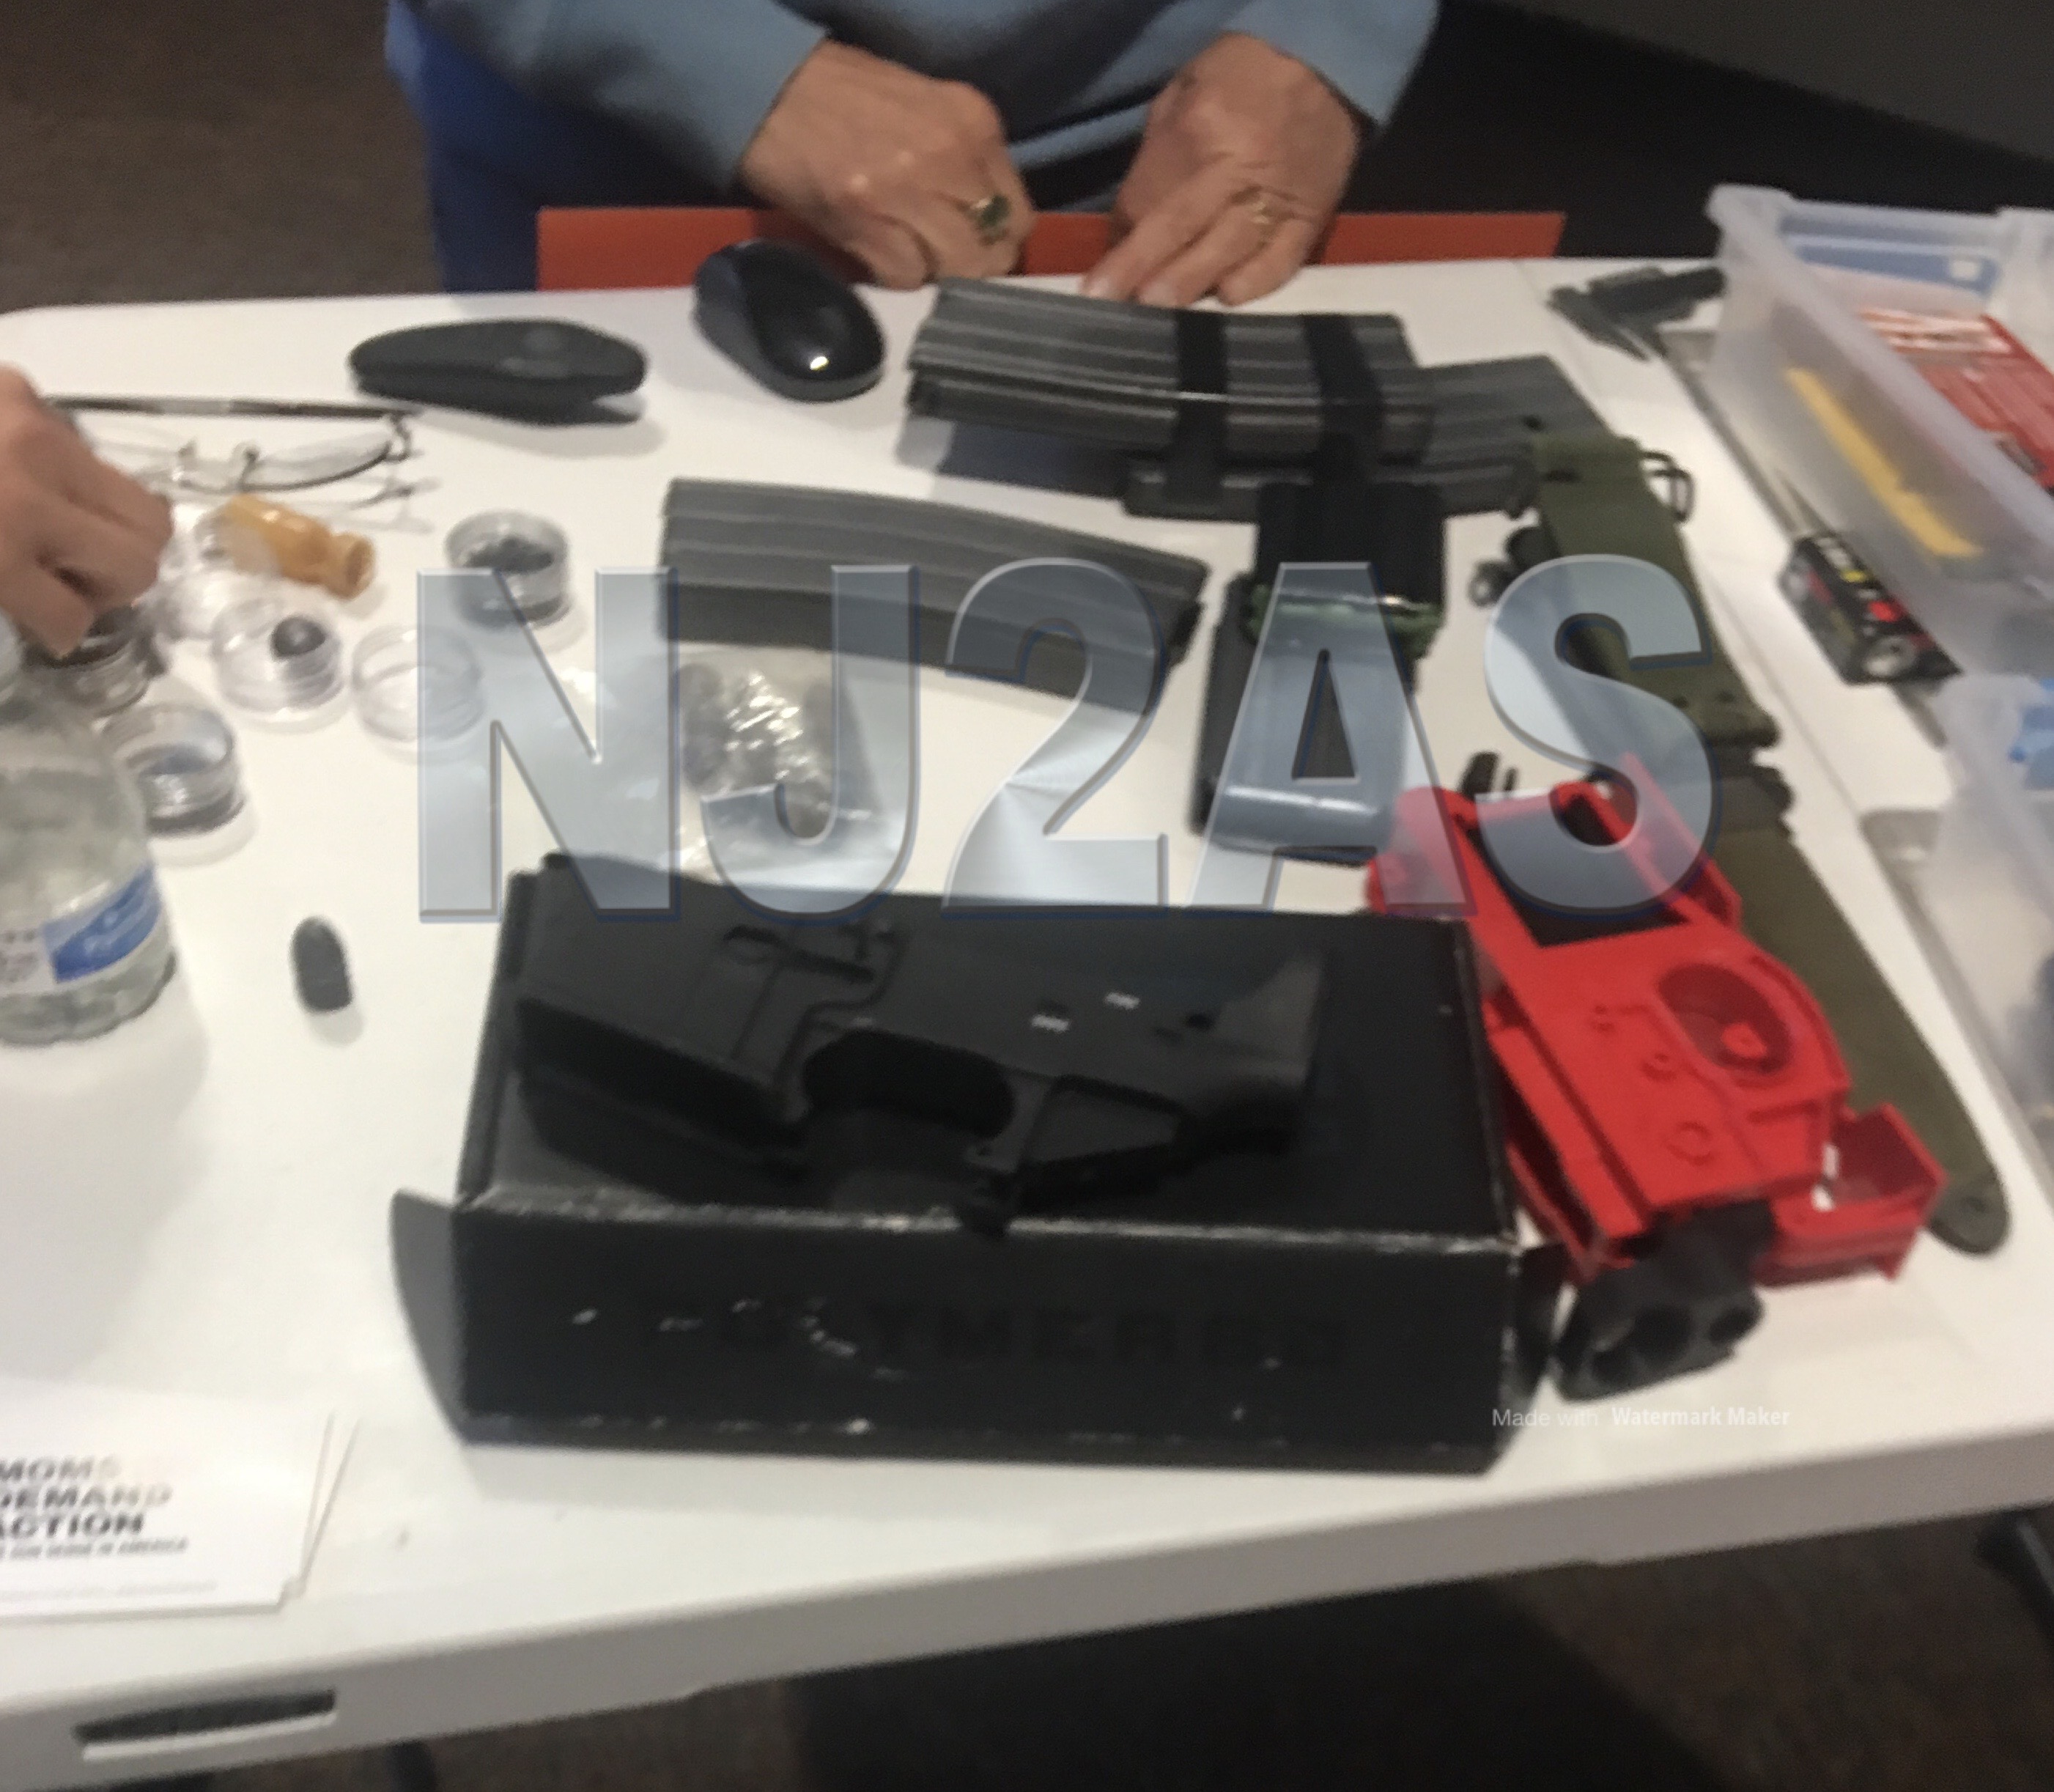 Moms Demand Action hosts event with illegal “large-capacity” magazines, “ghost gun” parts and tools, bayonet, and live ammunition